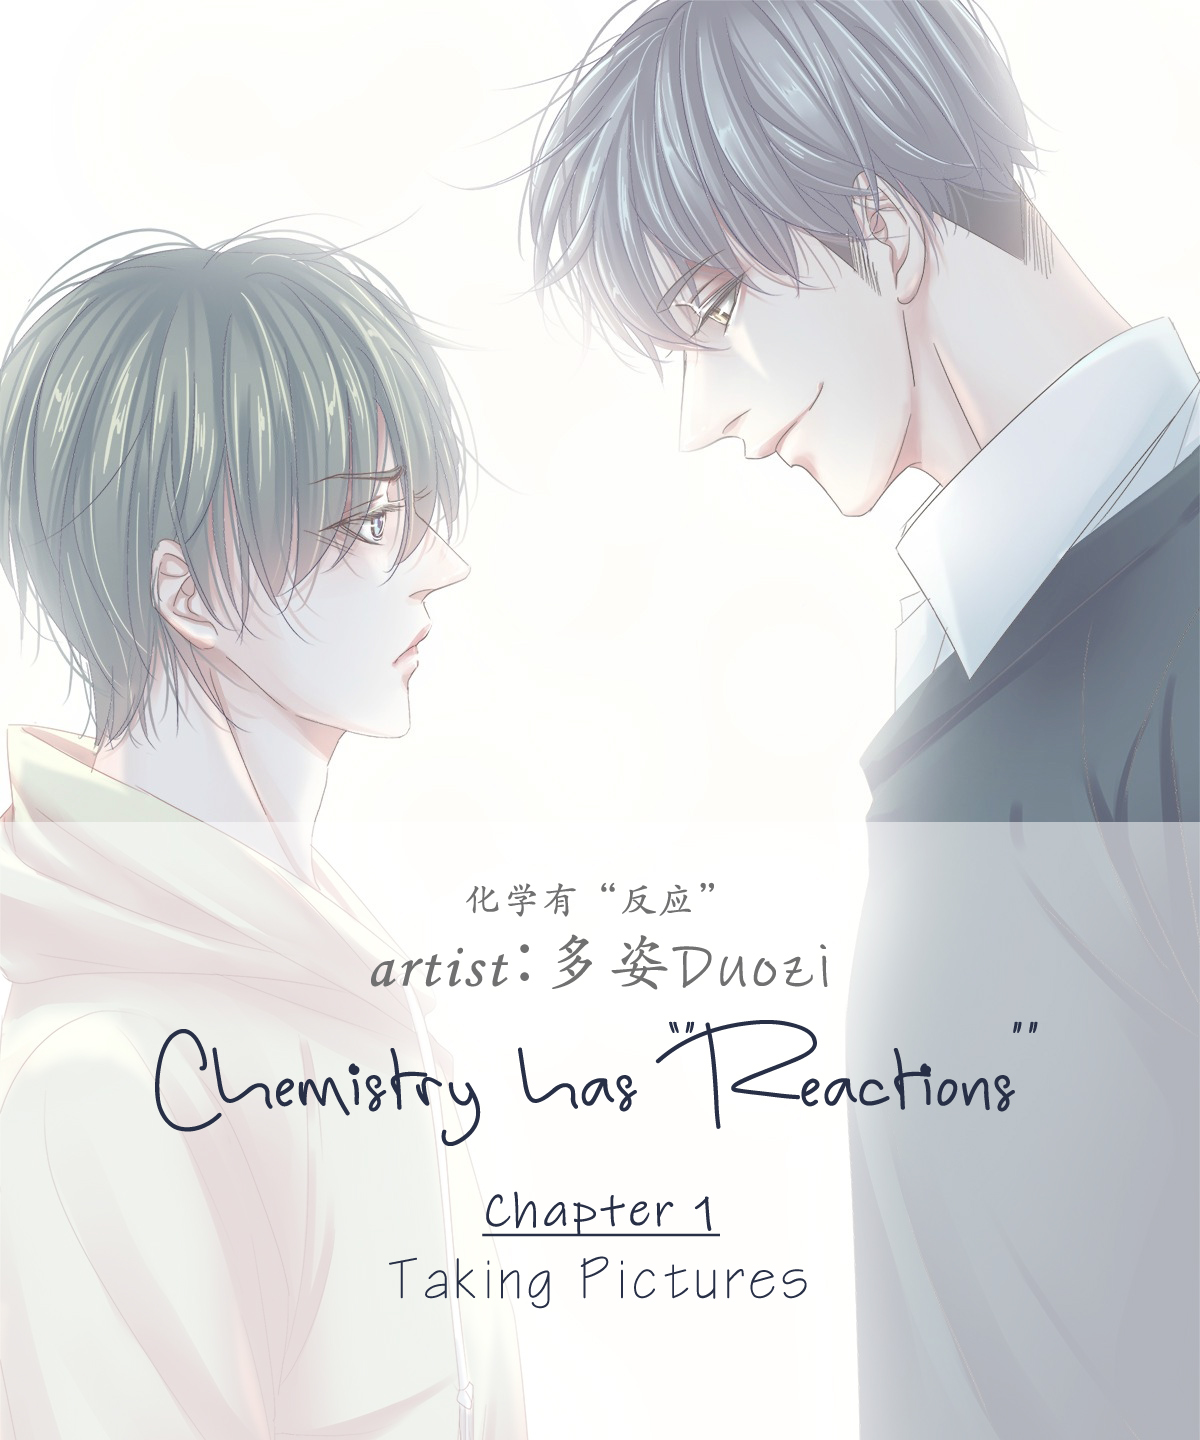 Chemistry has "Reactions" Vol. 1 Ch. 1